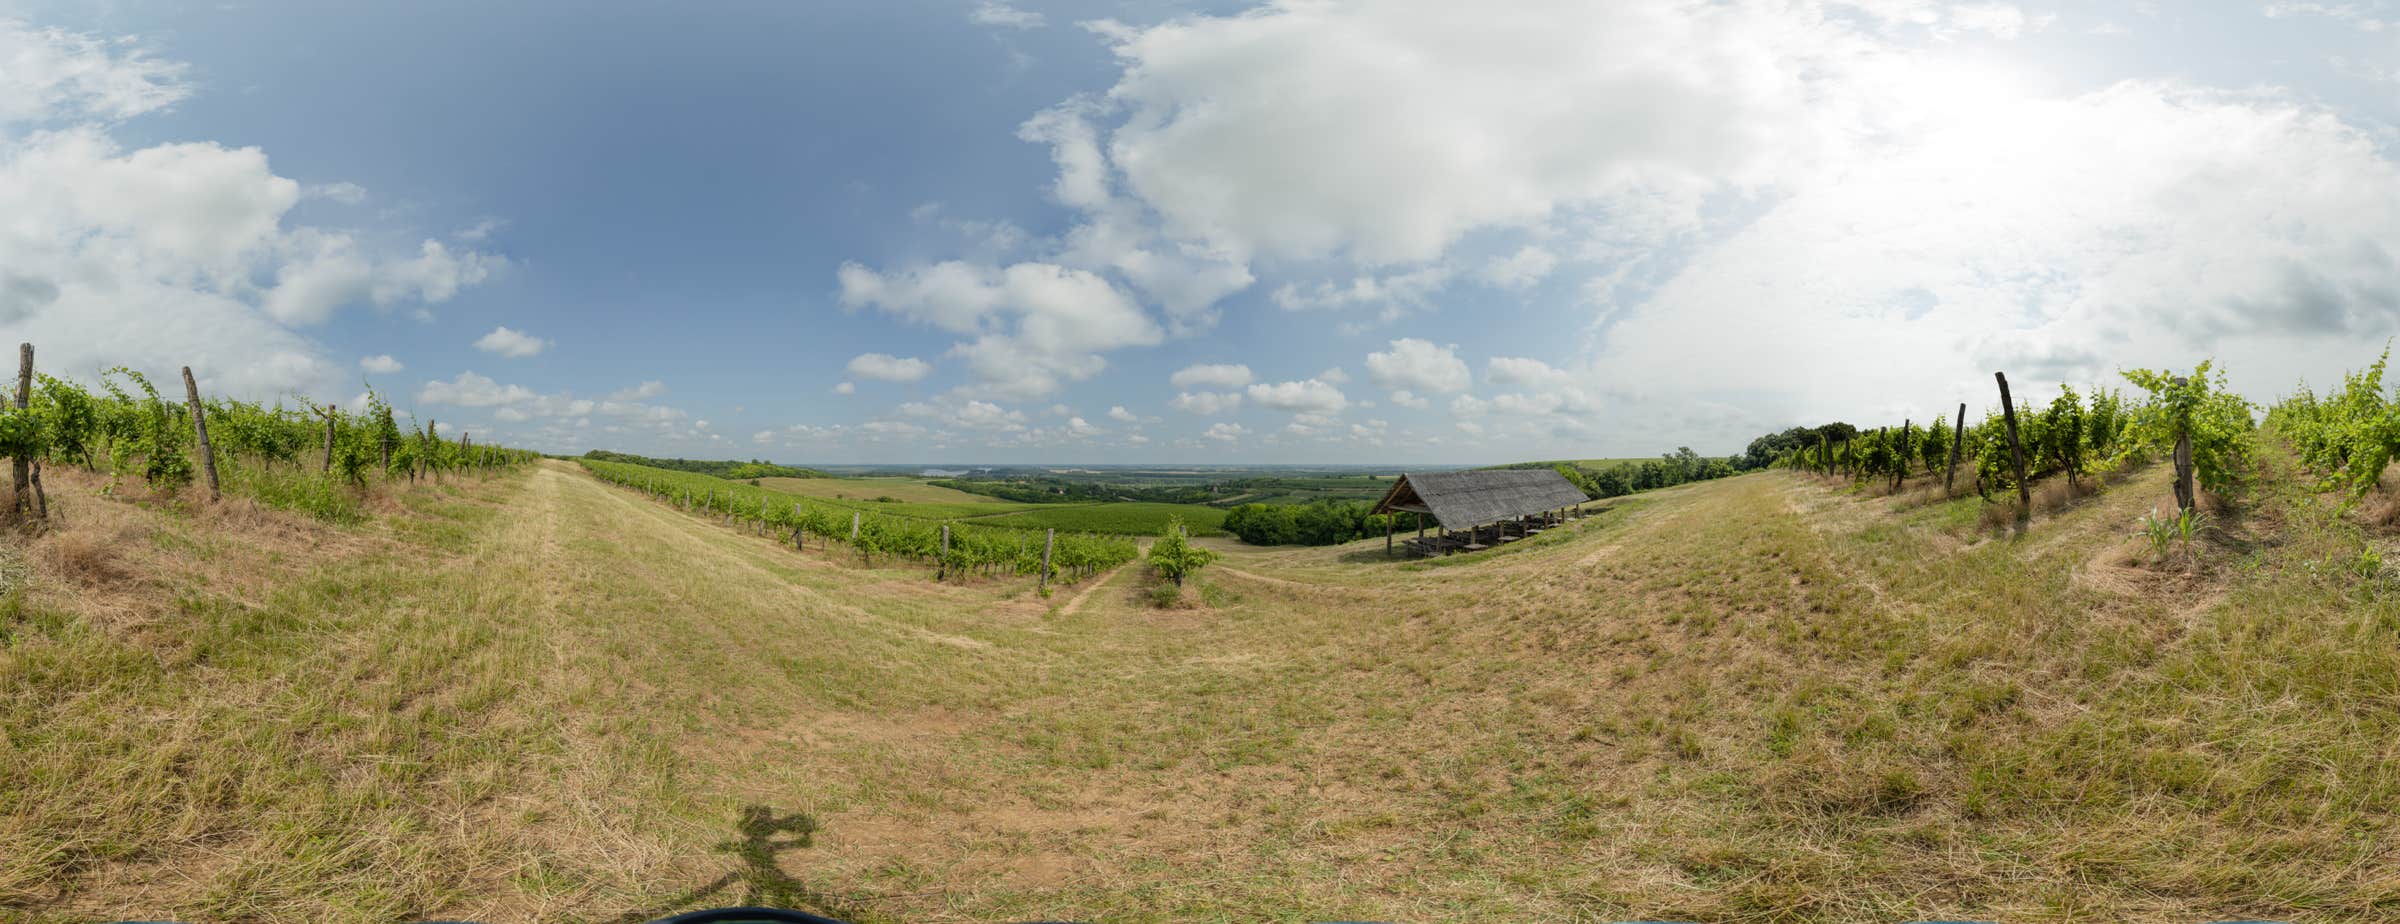 The 360° panoramic image shows the vineyard with multiple rows of grapevines and a roofed seating area. The image links to the panorama tour.